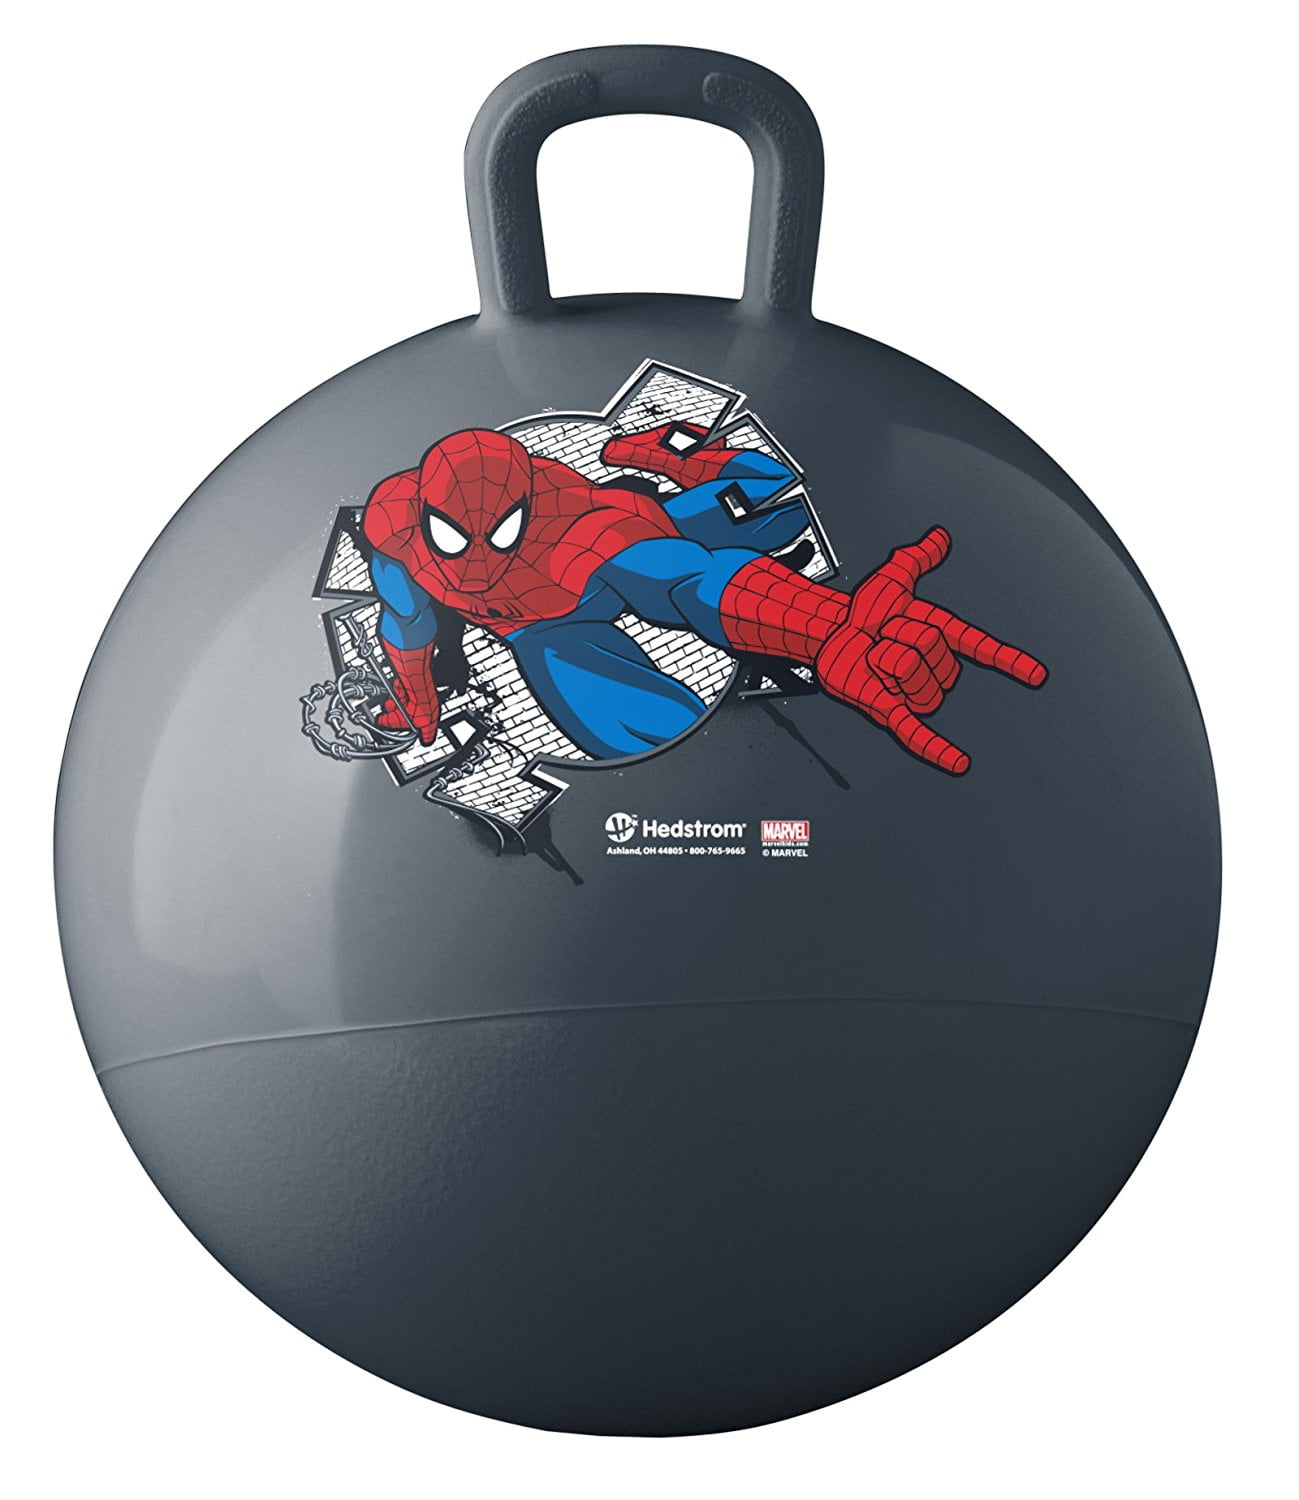 Marvel Ultimate Spider-Man Boy's Kids 5" Tall Bouncing Play Ball Toy Fun NEW